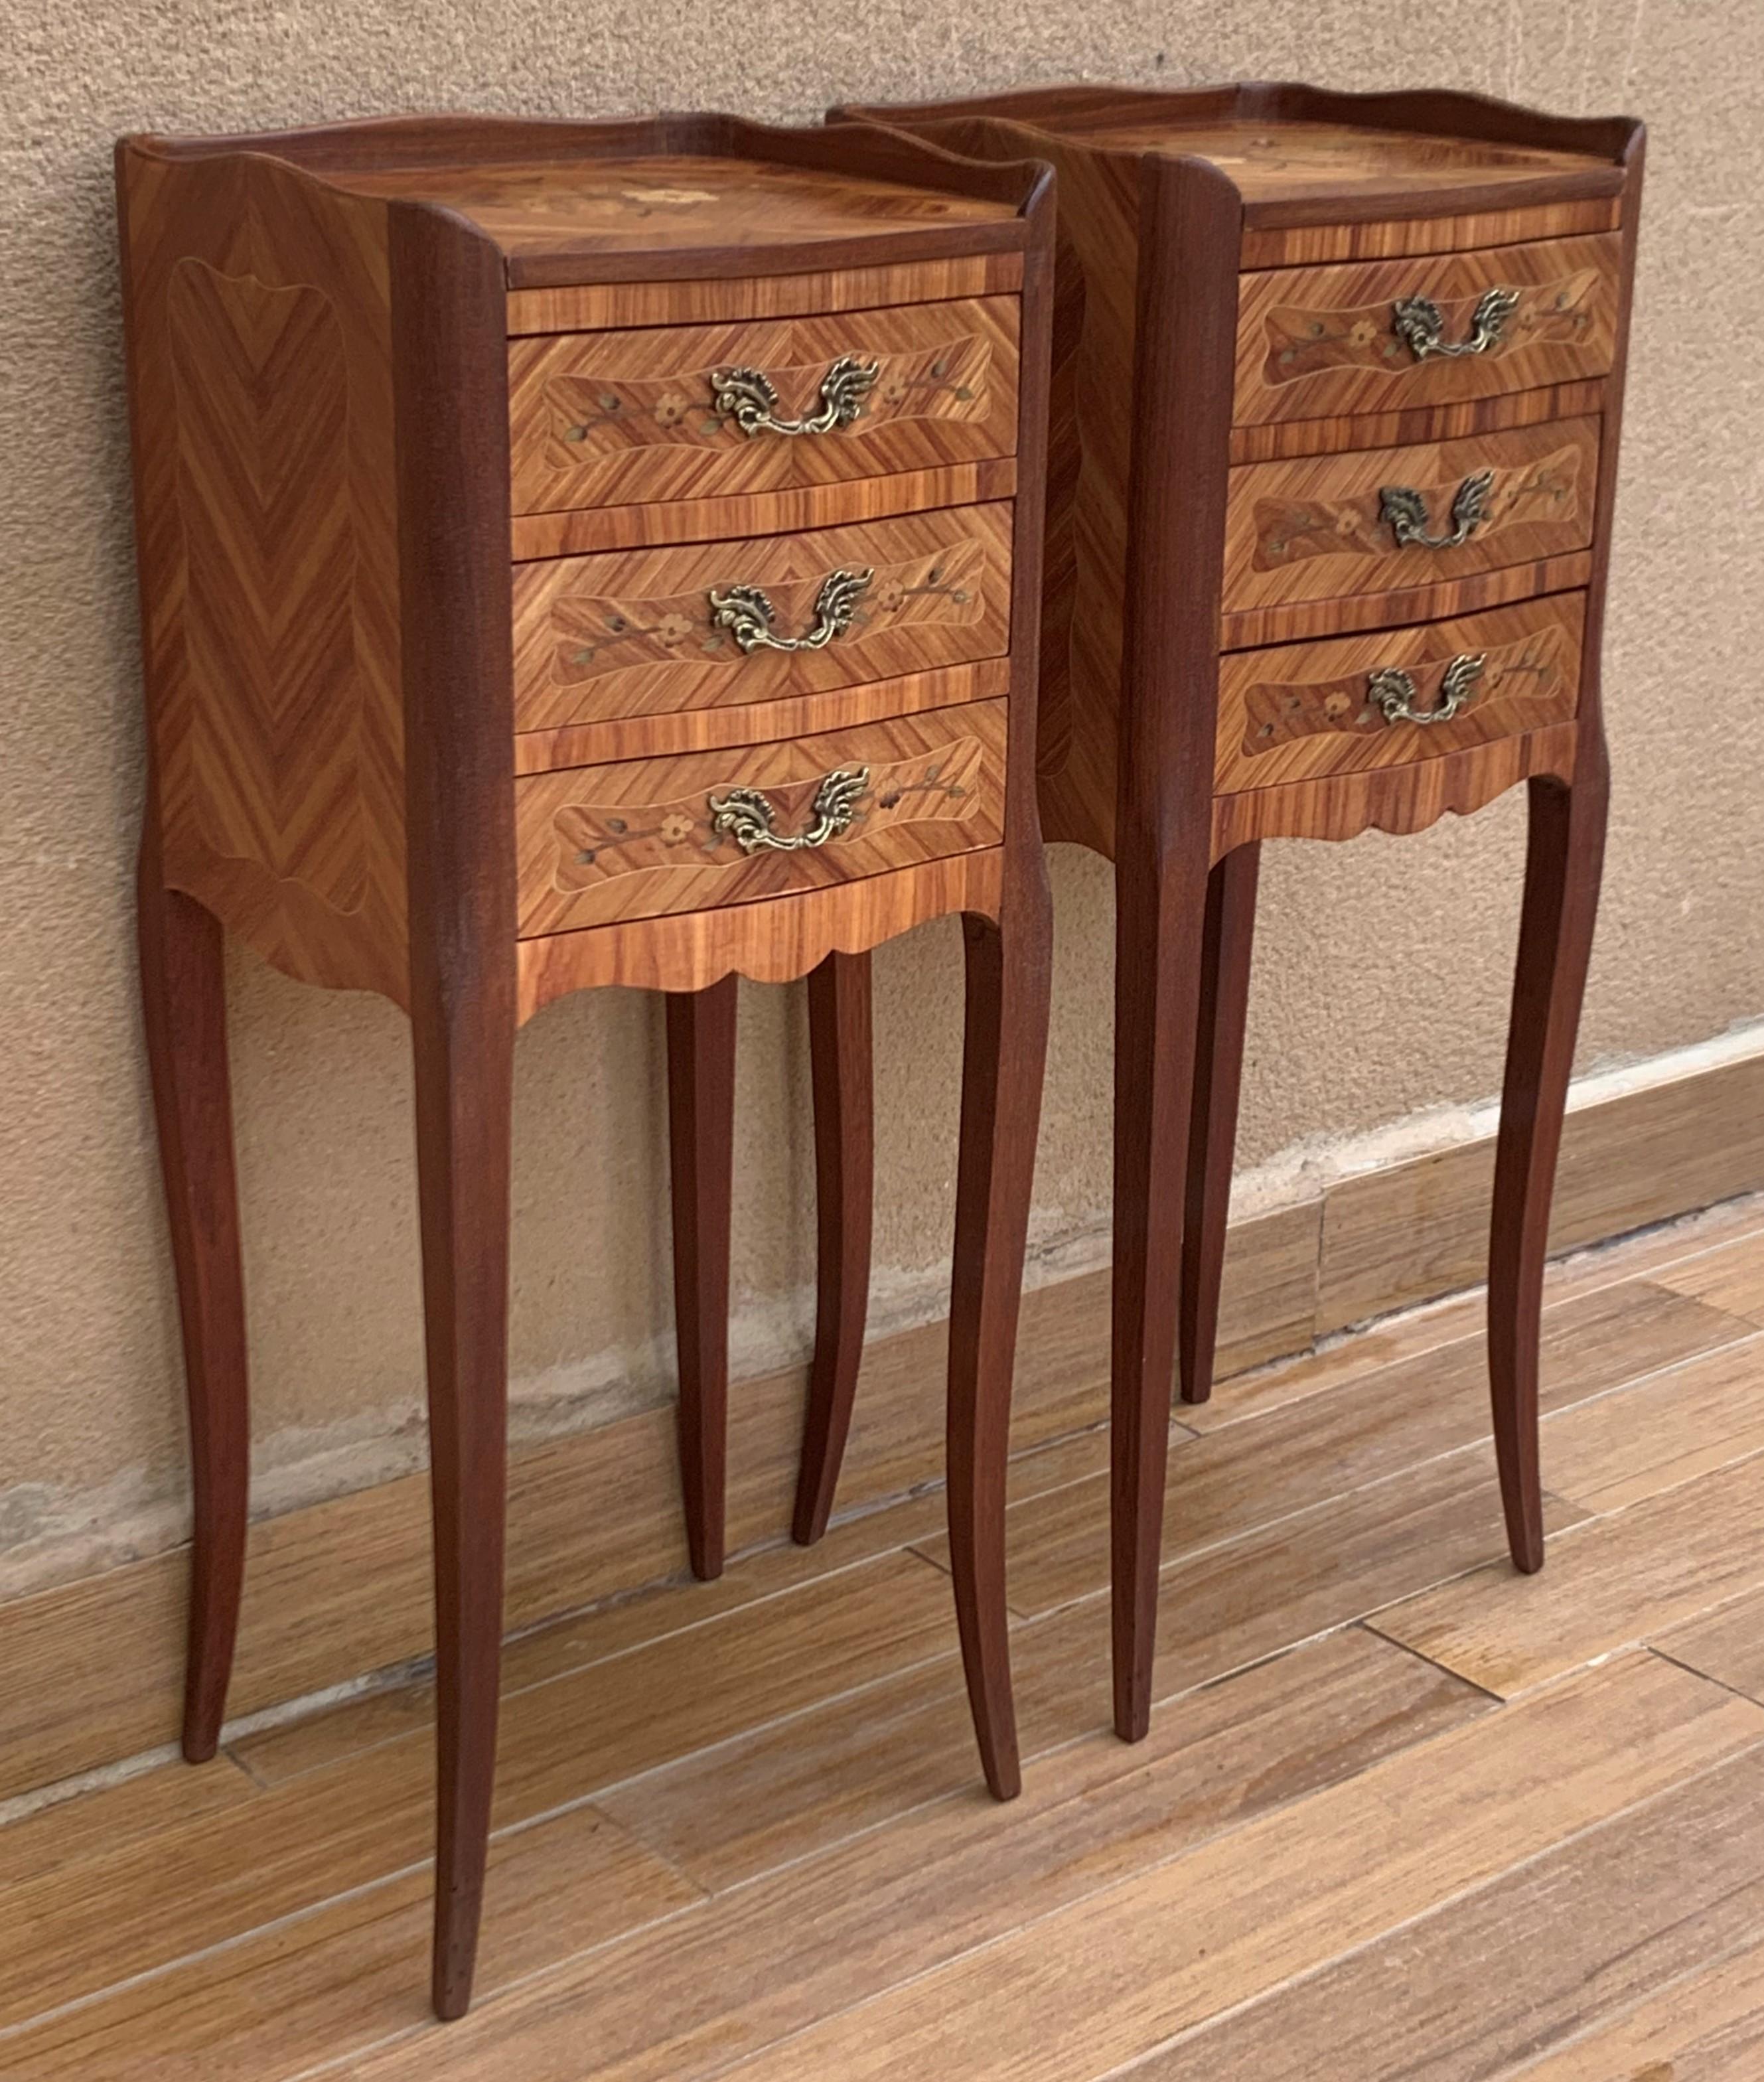 Pair of vintage French Louis XV style wood nightstands with three drawers
Beautiful wood inlays and decorative pulls.
3 working drawers open and close with ease.
These petite side tables are sturdy, ready for everyday use.
Minor chips and